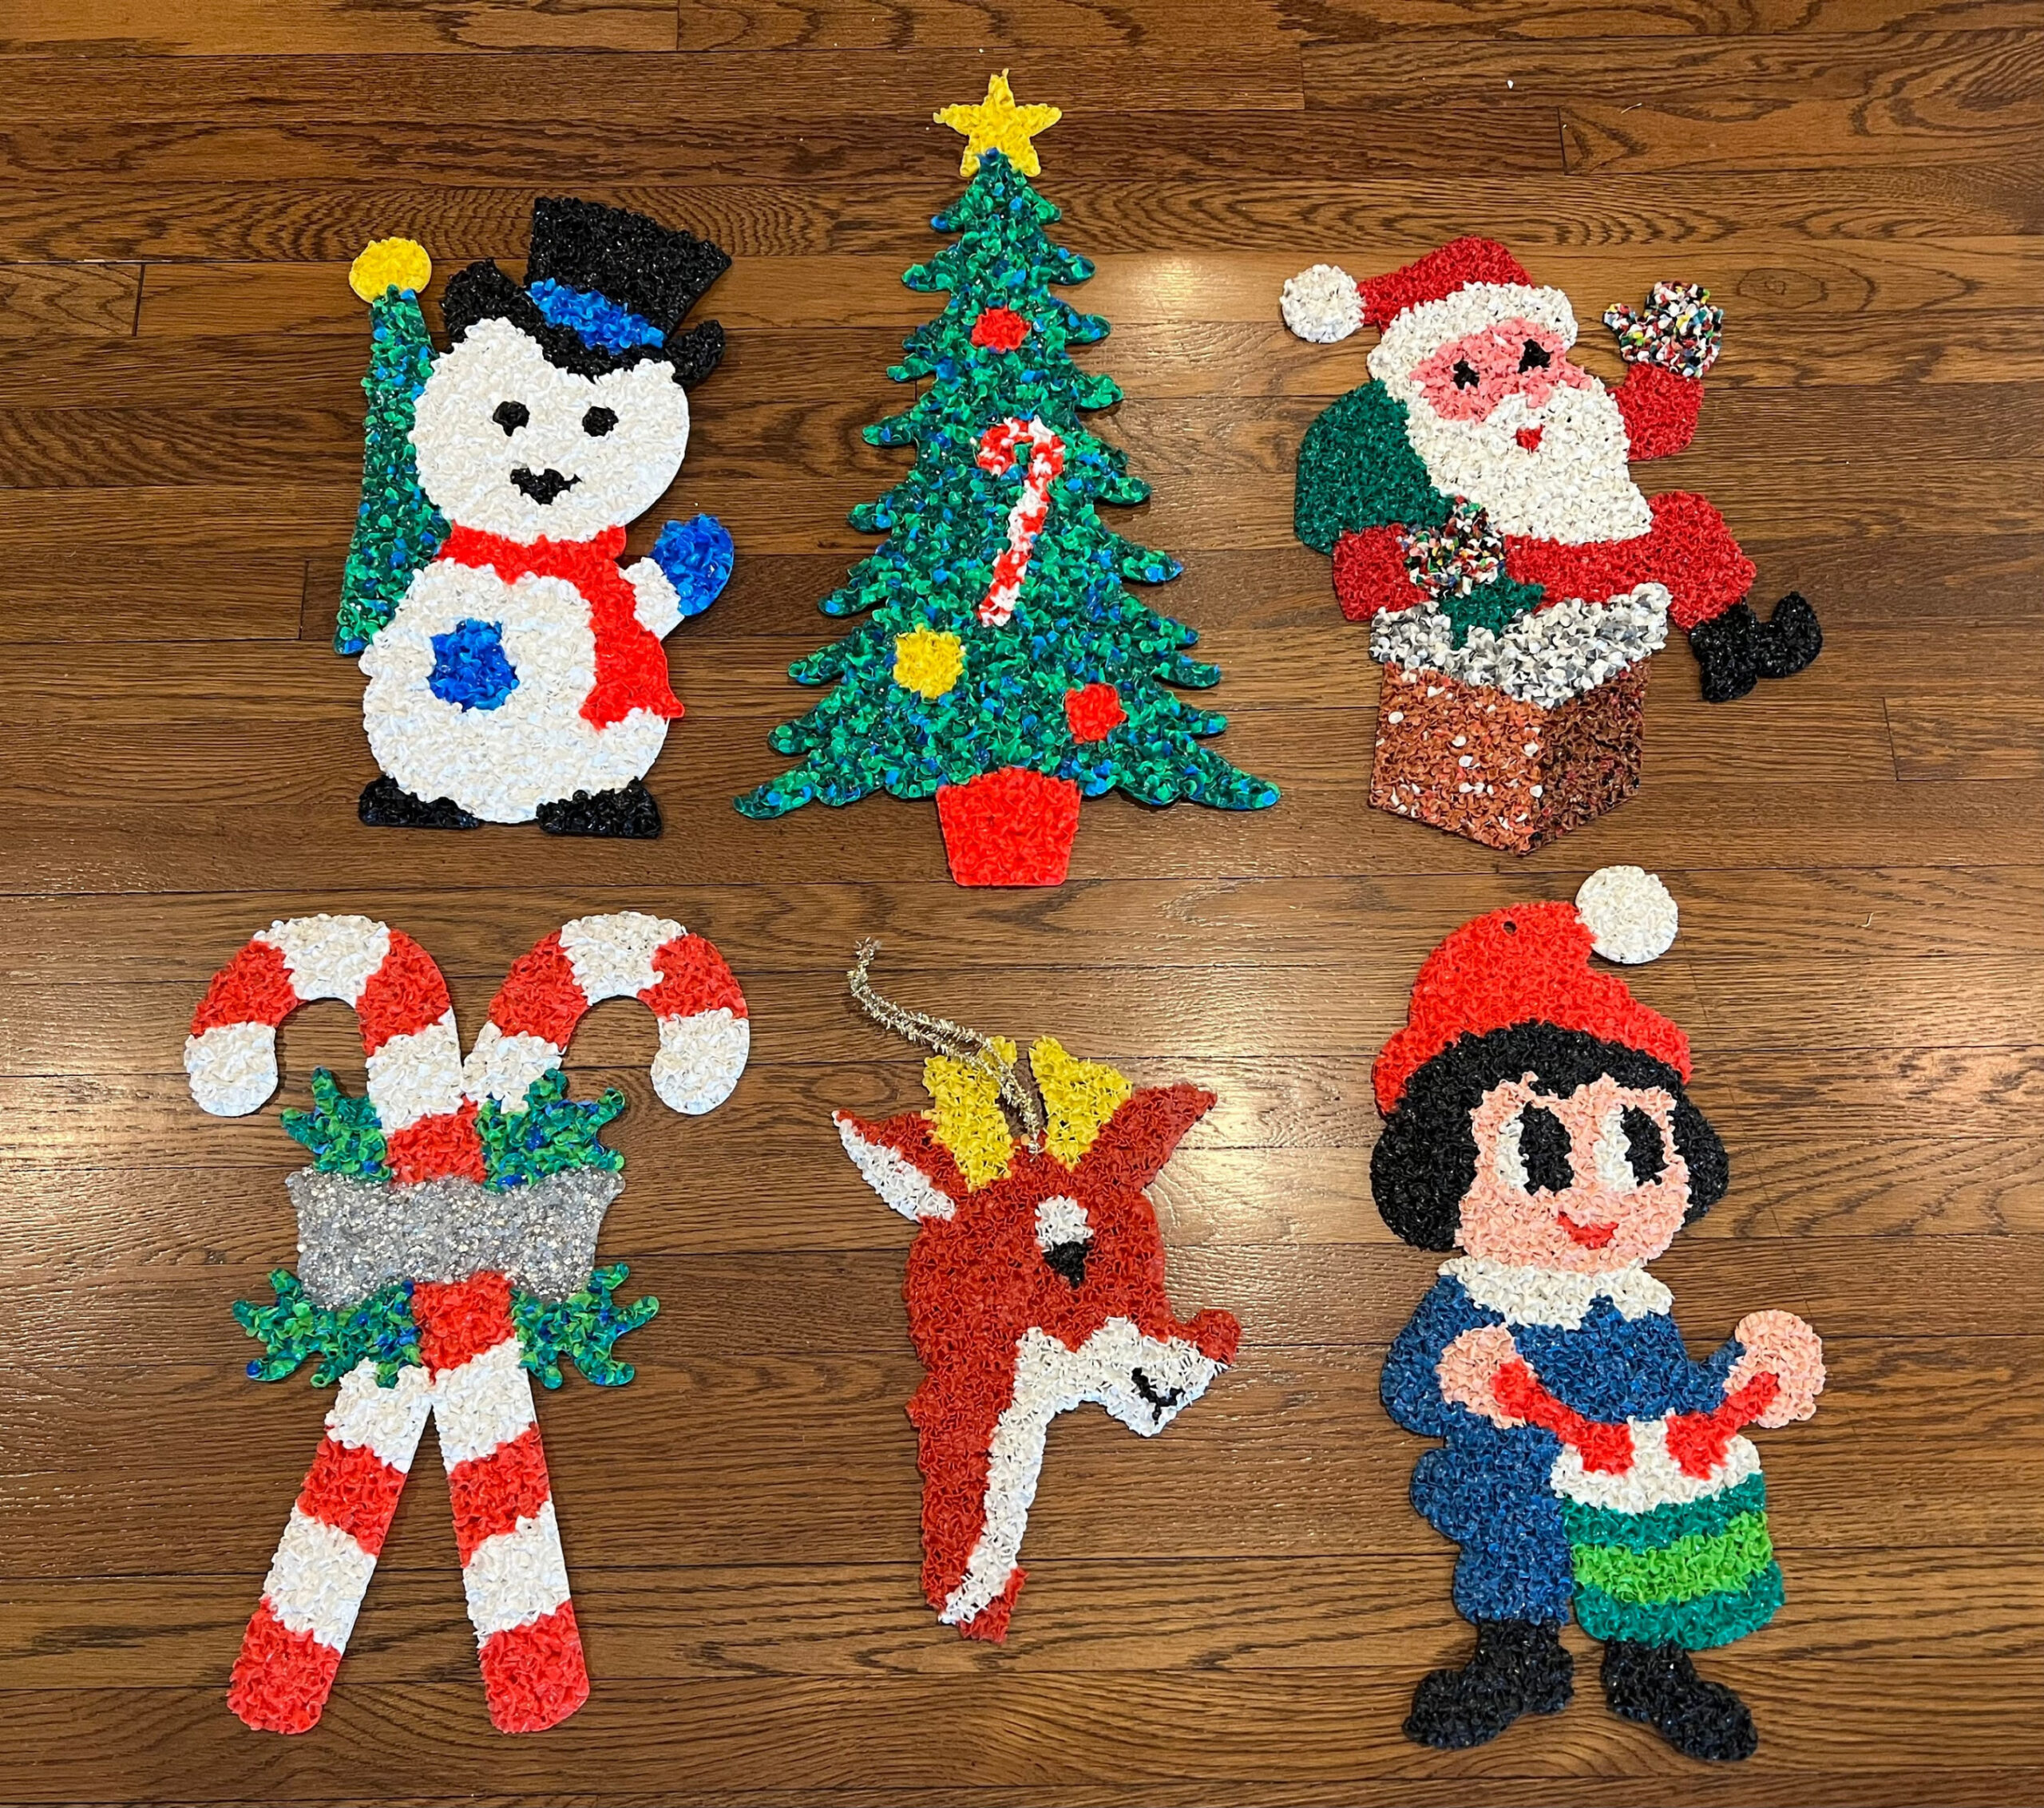 s Vintage Melted Popcorn Plastic Holiday Decorations - Options Include  - Drummer Boy, Rudolph & Frosty the Snowman